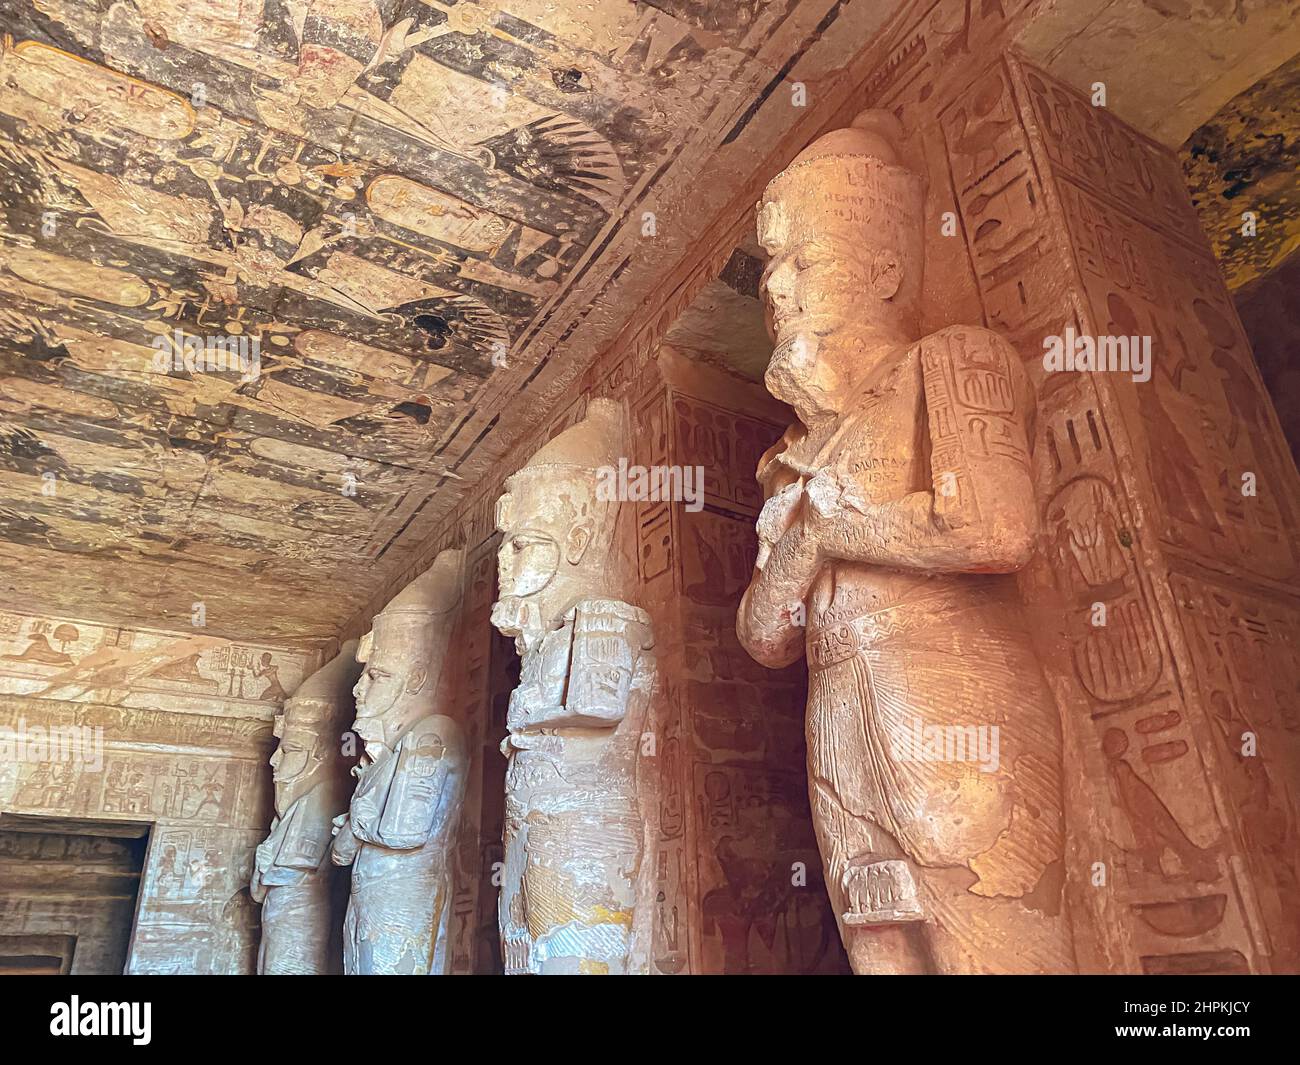 Abu Simbel, a rock in Nubia, two ancient Egyptian temples, the time of Ramses II Stock Photo